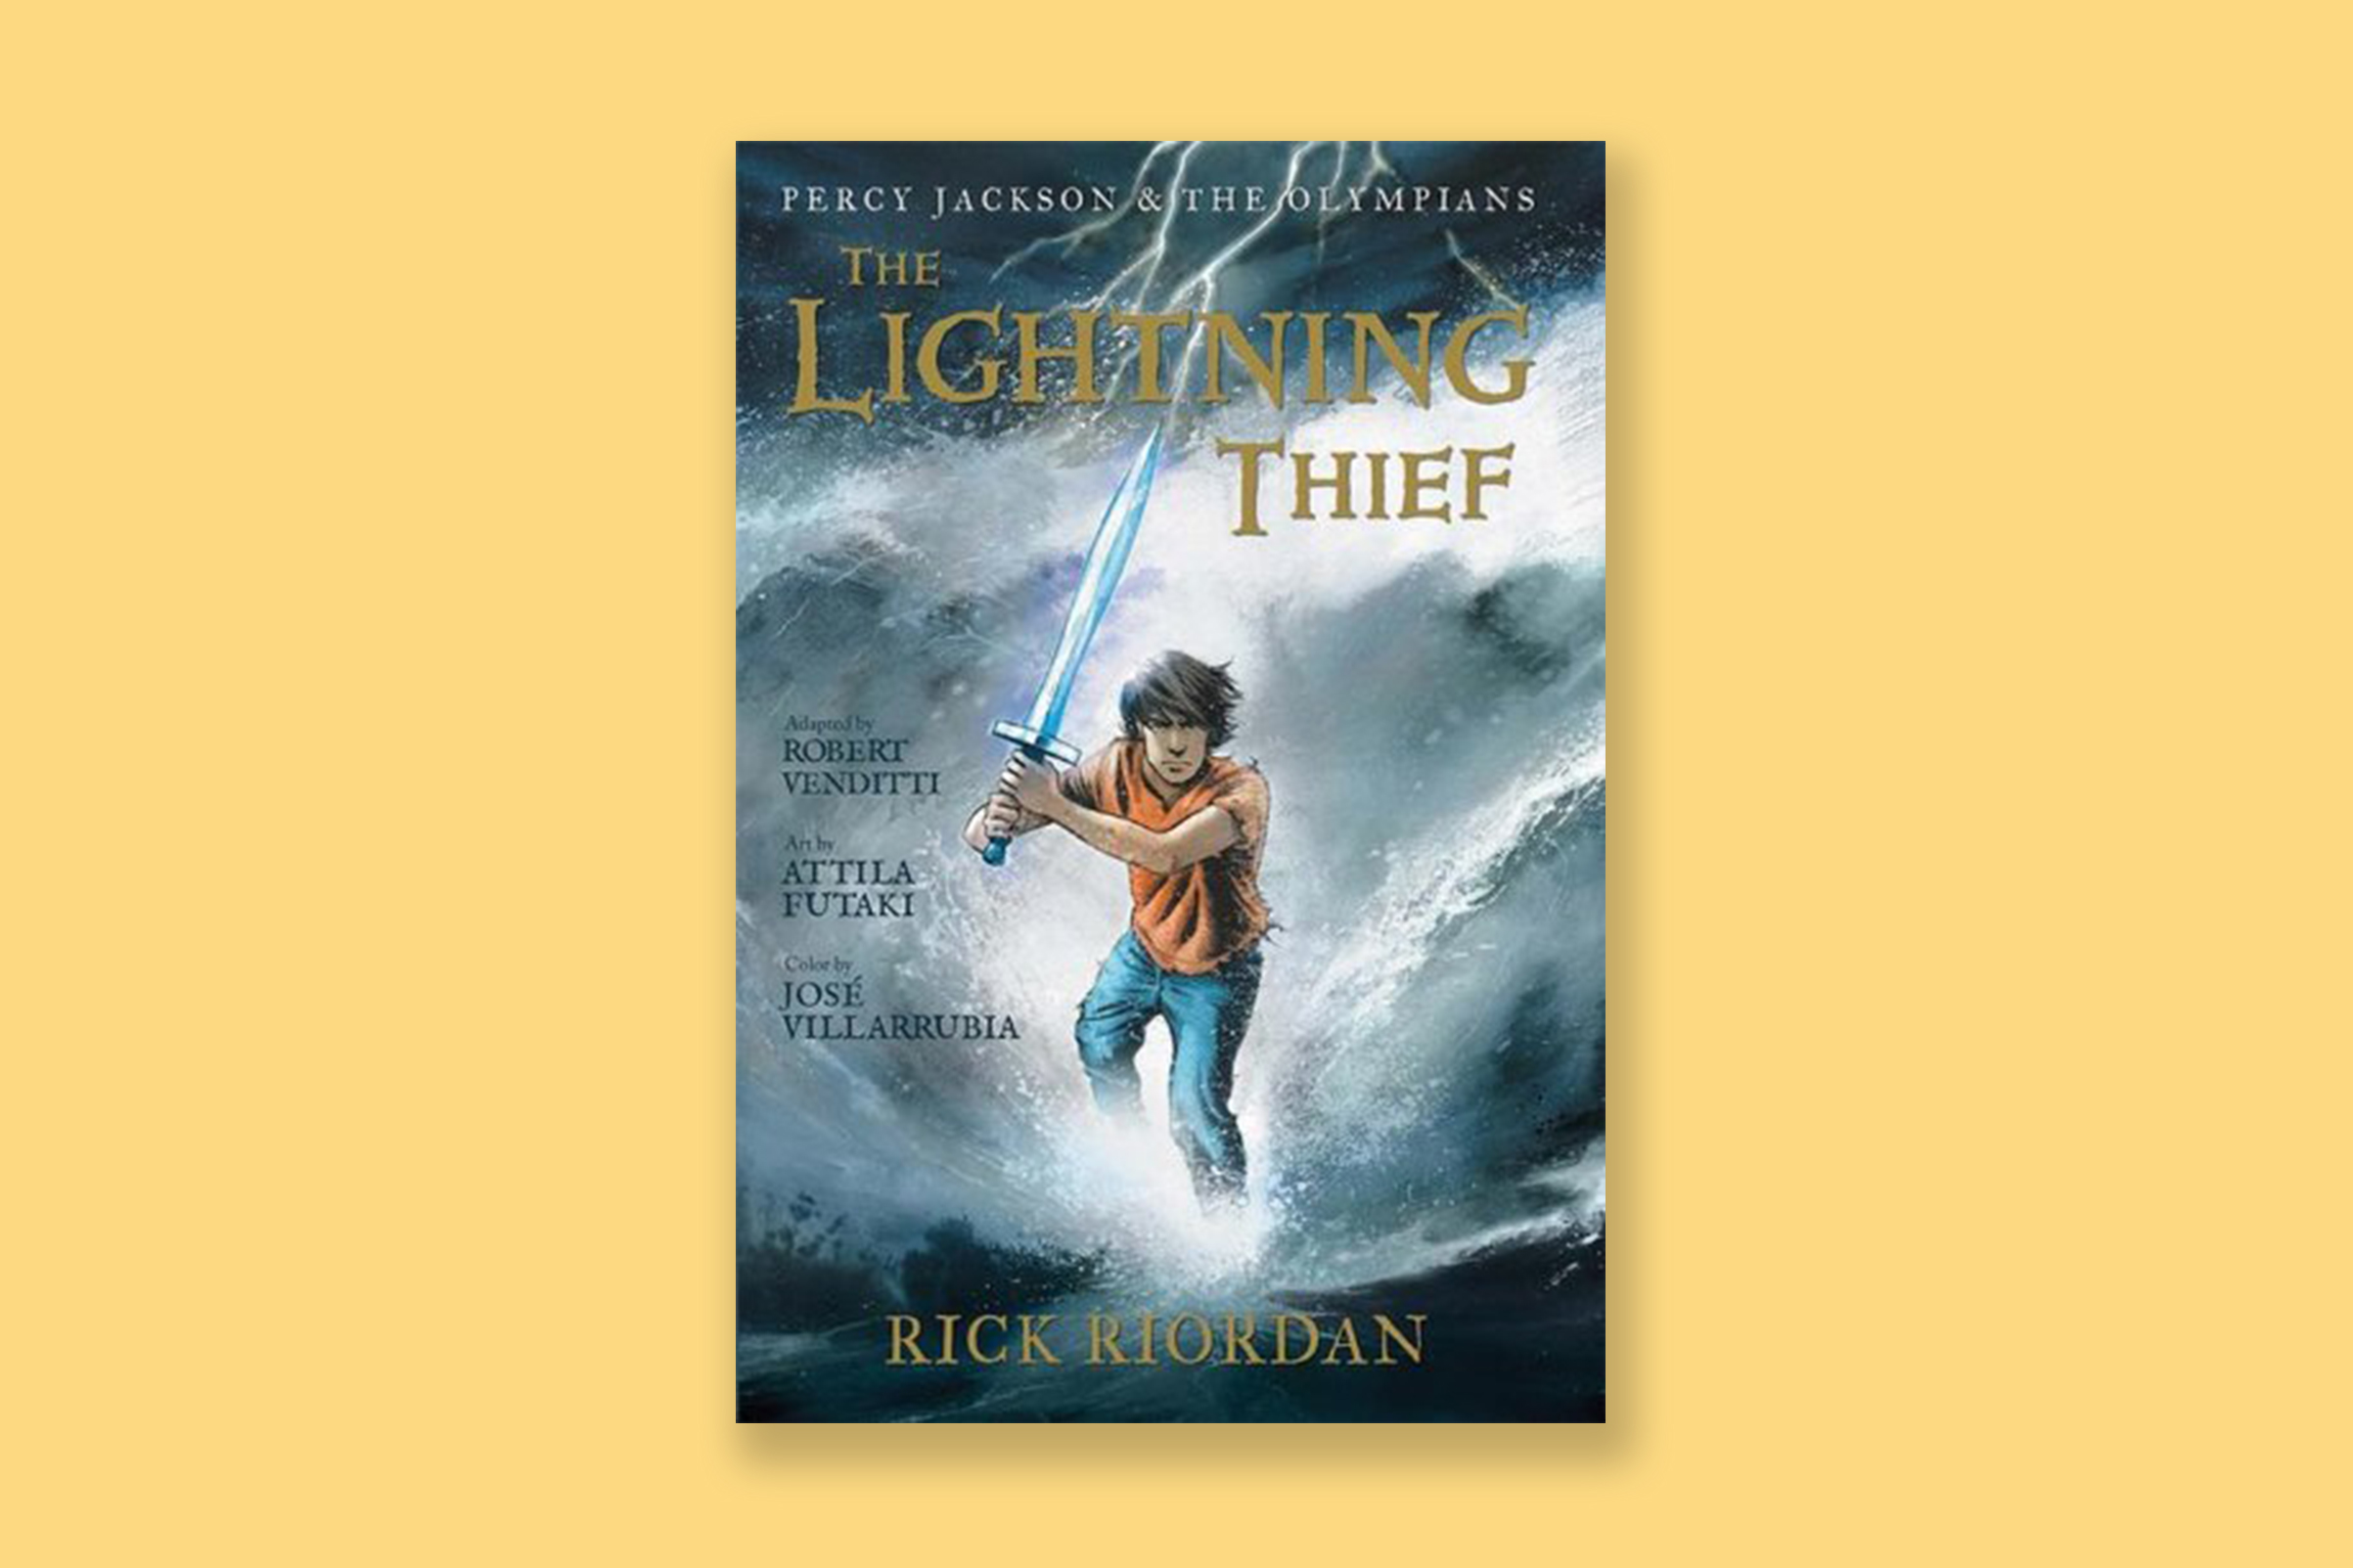 the lightning thief percy jackson and the olympians series by rick riordan